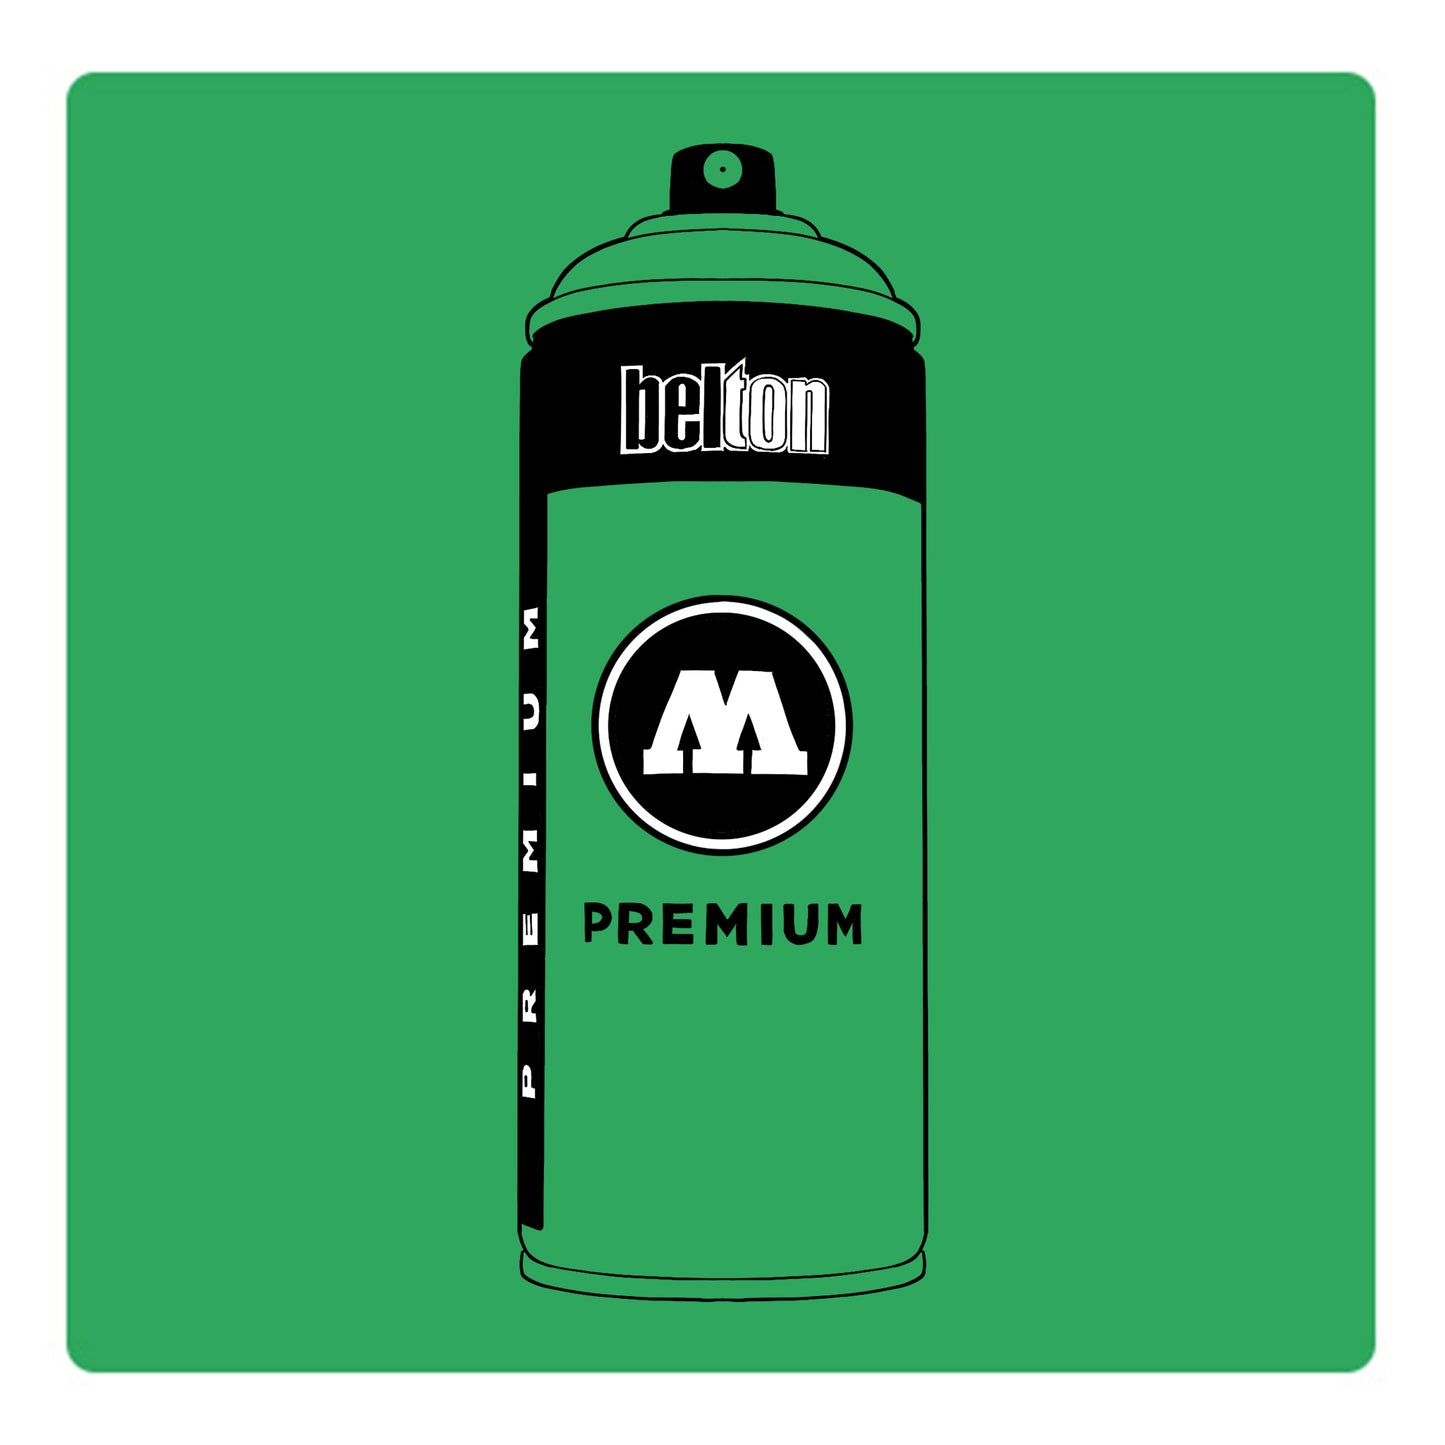 A black outline drawing of a jade green spray paint can with the words "belton","premium" and the letter"M" written on the face in black and white font. The background is a color swatch of the same jade green with a white border